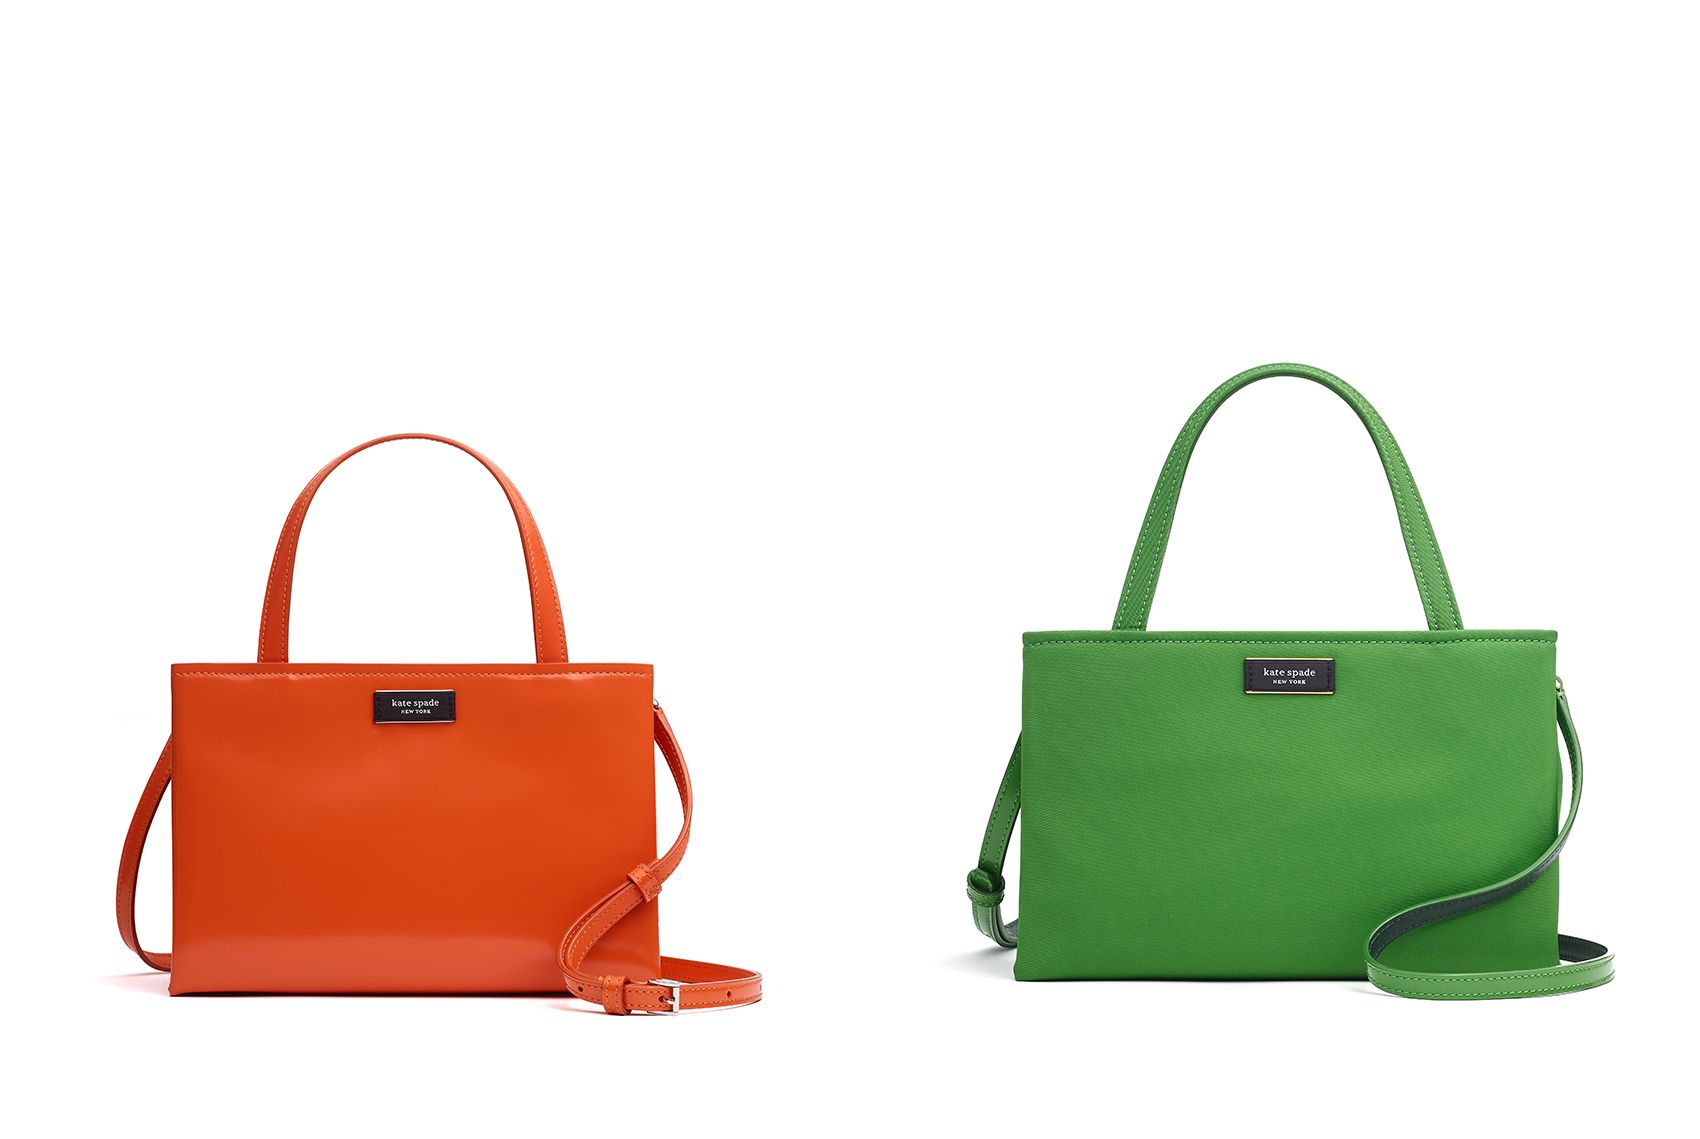 Kate Spade New York Releases Icon Sam Bag for Fall 2022